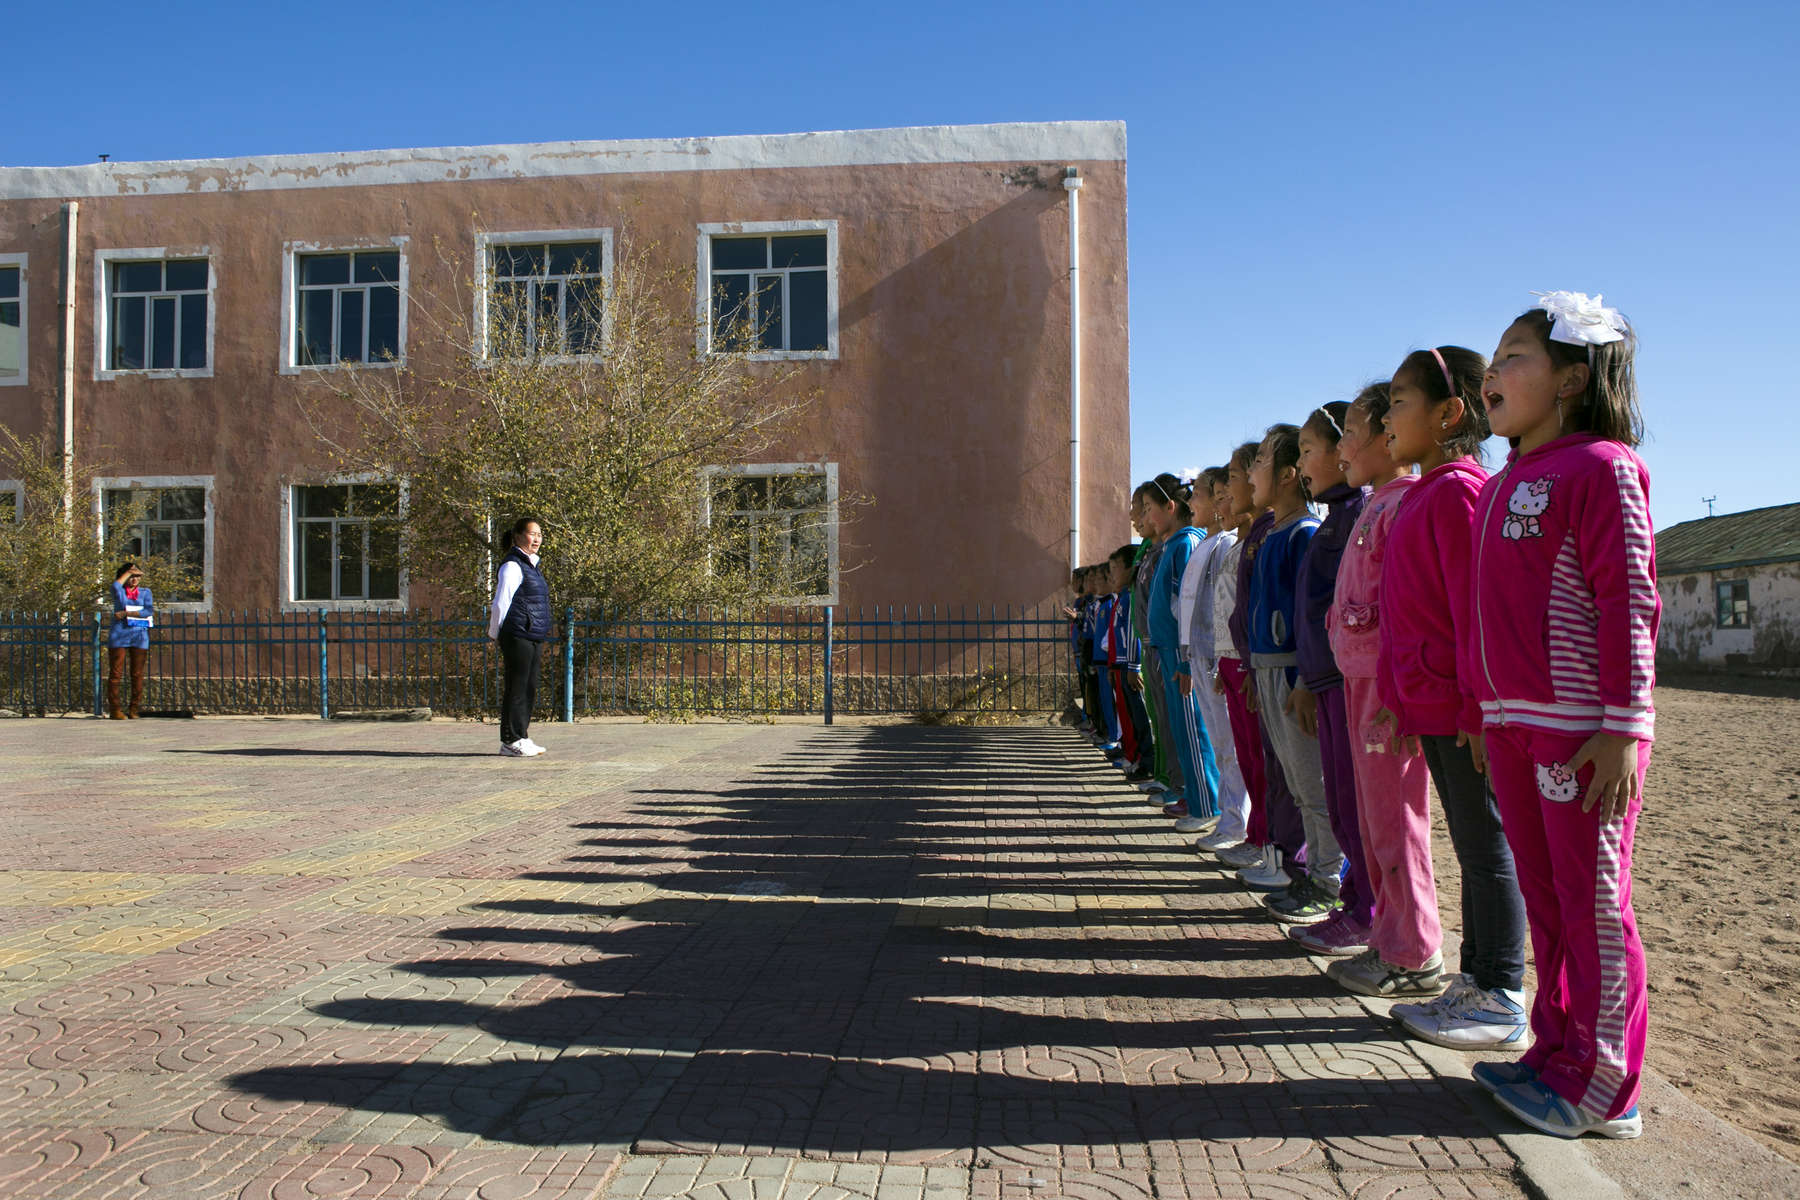 KHANBOGD-SOUTH GOBI DESERT, MONGOLIA - OCTOBER 13:  Students line up during a physical education program at the Khanbogd Secondary school October 13, 2012  in Khanbogd, Mongolia. The population of Khanbogd has doubled in the last few years along with the secondary school adding a new extension to accommodate the growing number of students since Oyu Tolgoi employs most of the people in the town.The Oyu Tolgoi copper and gold mine (translated means Turquiose Hill) is a combined open pit and underground mining project.  While the construction continues open pit mining is currently underway with full production expected later in 2012. When the mine starts full operation the country will be set to become one of the world's top copper and gold producers with estimates of 450,000 tons of copper and 330,000 ounces of gold. Financing for the project has come in part from the Rio Tinto Group and an investment agreement between Ivanhoe Mines and the government of Mongolia. Mongolia’s largest foreign investment project to date which is projected to add one-third of future value to the country’s GDP. Many estimate Mongolia to be the world's fastest growing economy with an estimated $1.3 trillion in untapped mineral resources. (Photo by Paula Bronstein/Getty Images)